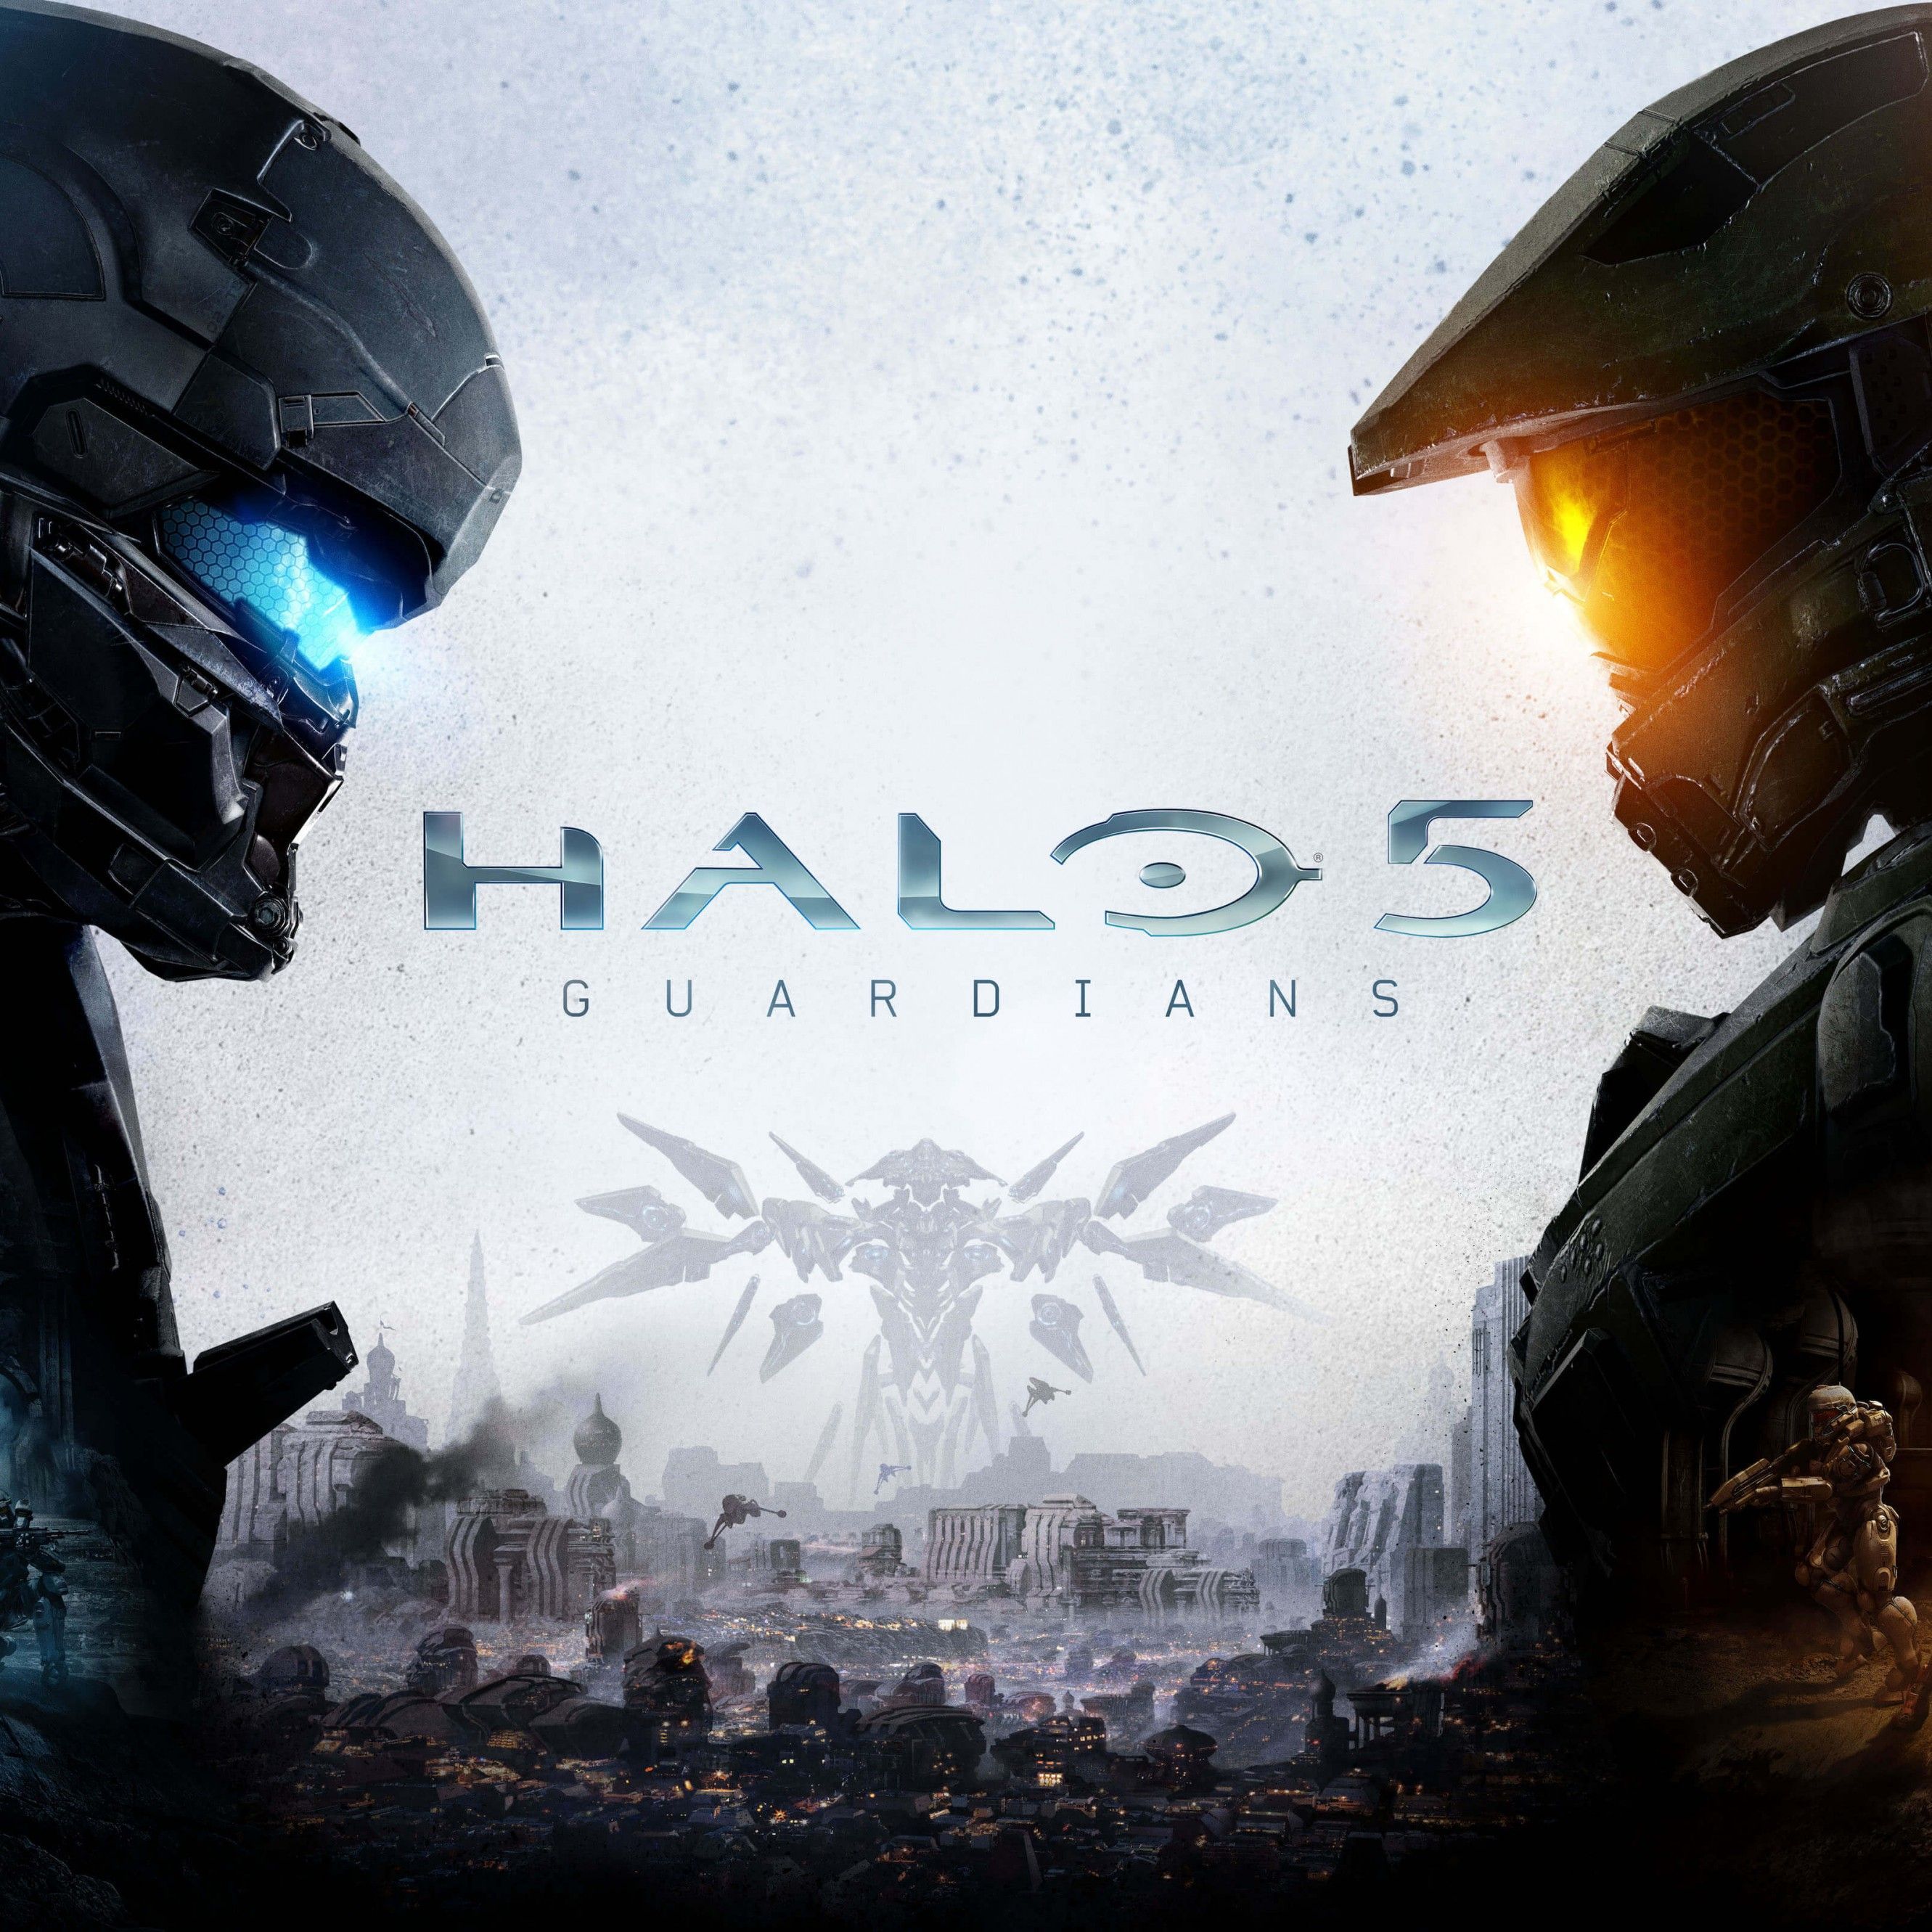 Download Halo 5 Guardians HD wallpaper for iPhone 6 Plus